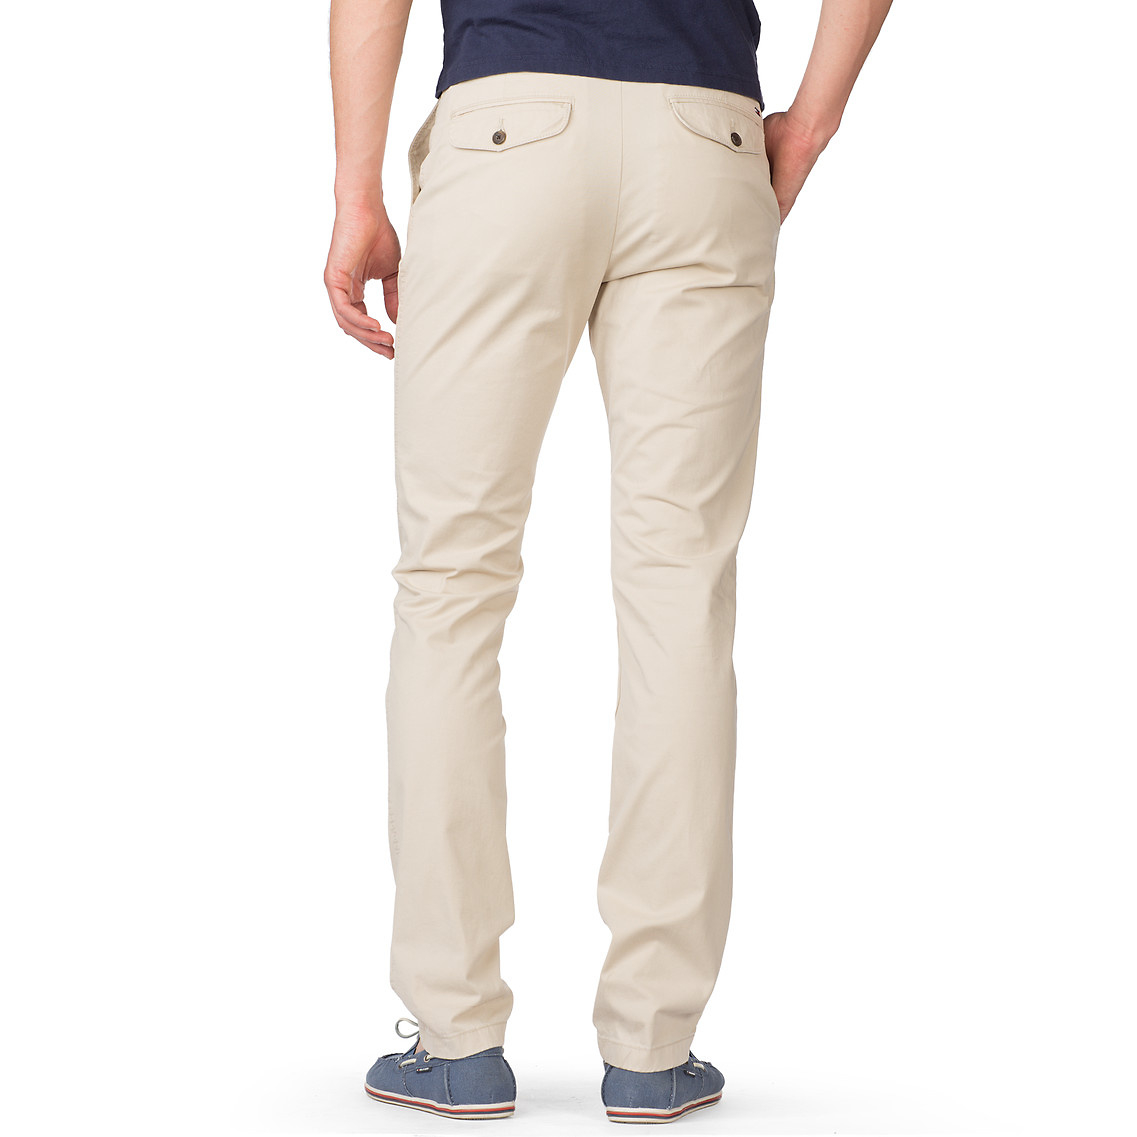 tommy hilfiger hudson chino OFF 60% - Online Shopping Site for Fashion &  Lifestyle.